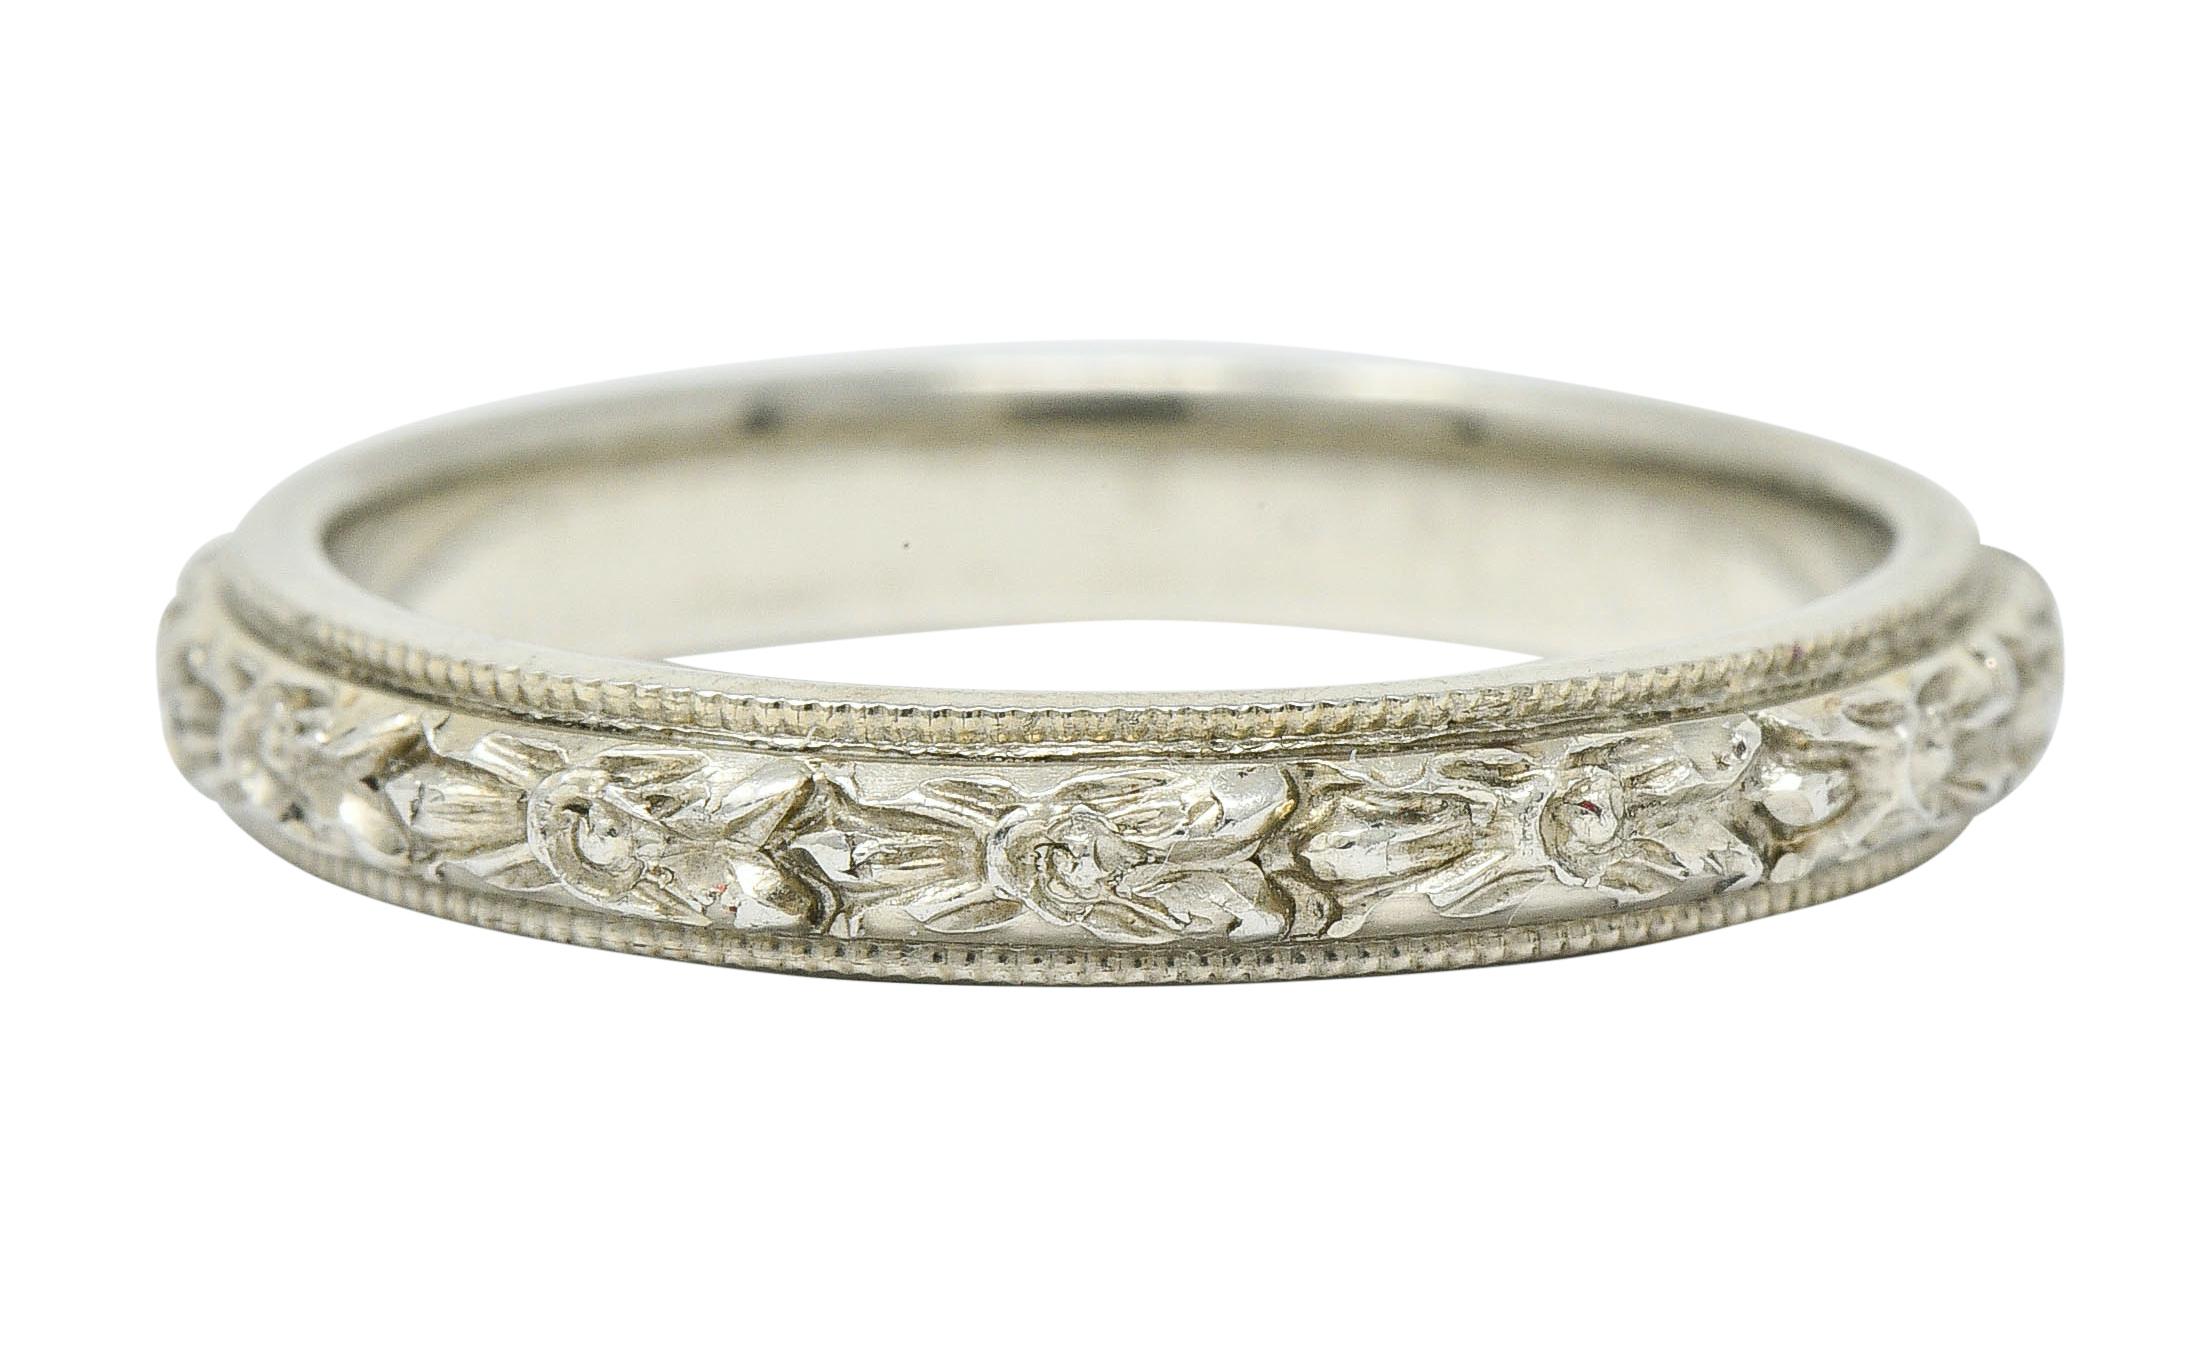 Band style ring with milgrain edges and a deeply engraved center

Featuring highly rendered florals flanked by foliate, repeated fully around

With maker's mark for J.R. Wood & Sons

Stamped 18K for 18 karat gold

Circa: 1930s

Ring Size: 5 & not